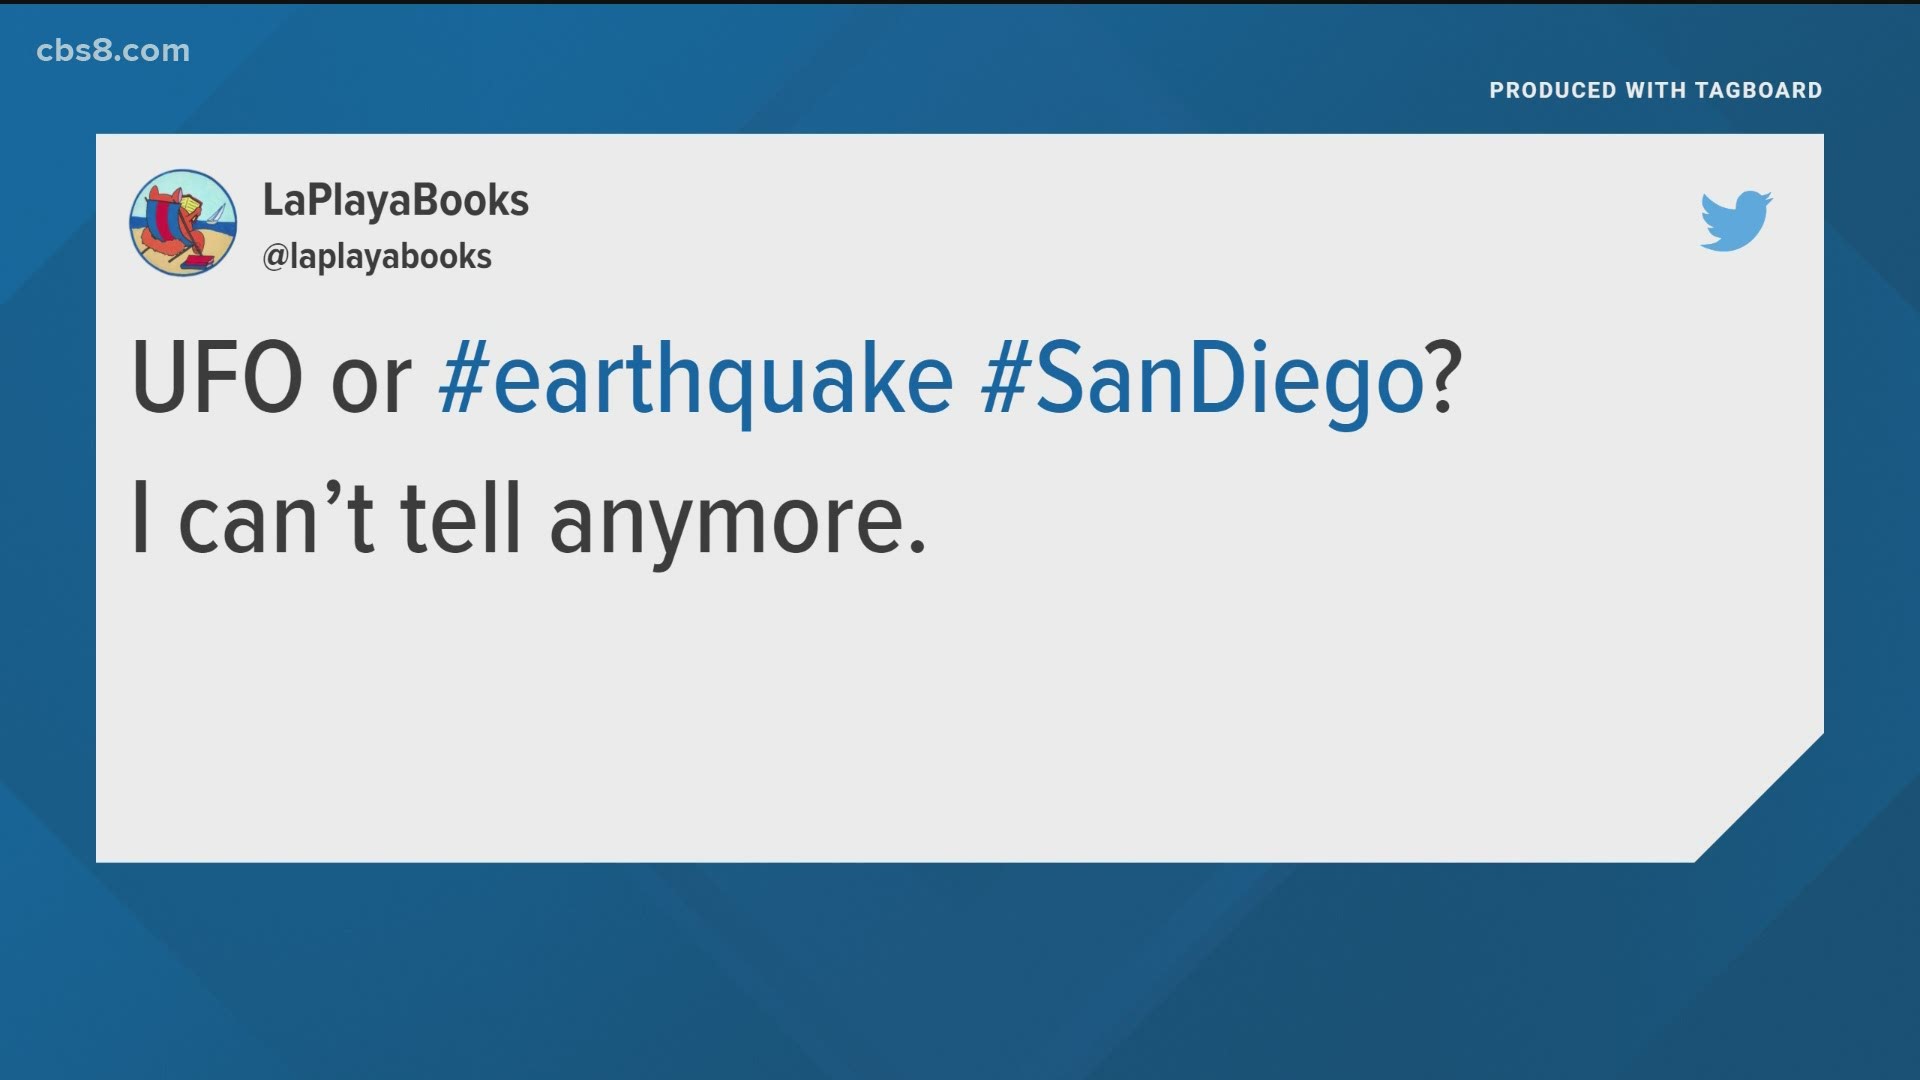 Social media lit up Tuesday night with reports of an earthquake-like shaking and loud noise all around San Diego County. No earthquakes were reported by USGS.